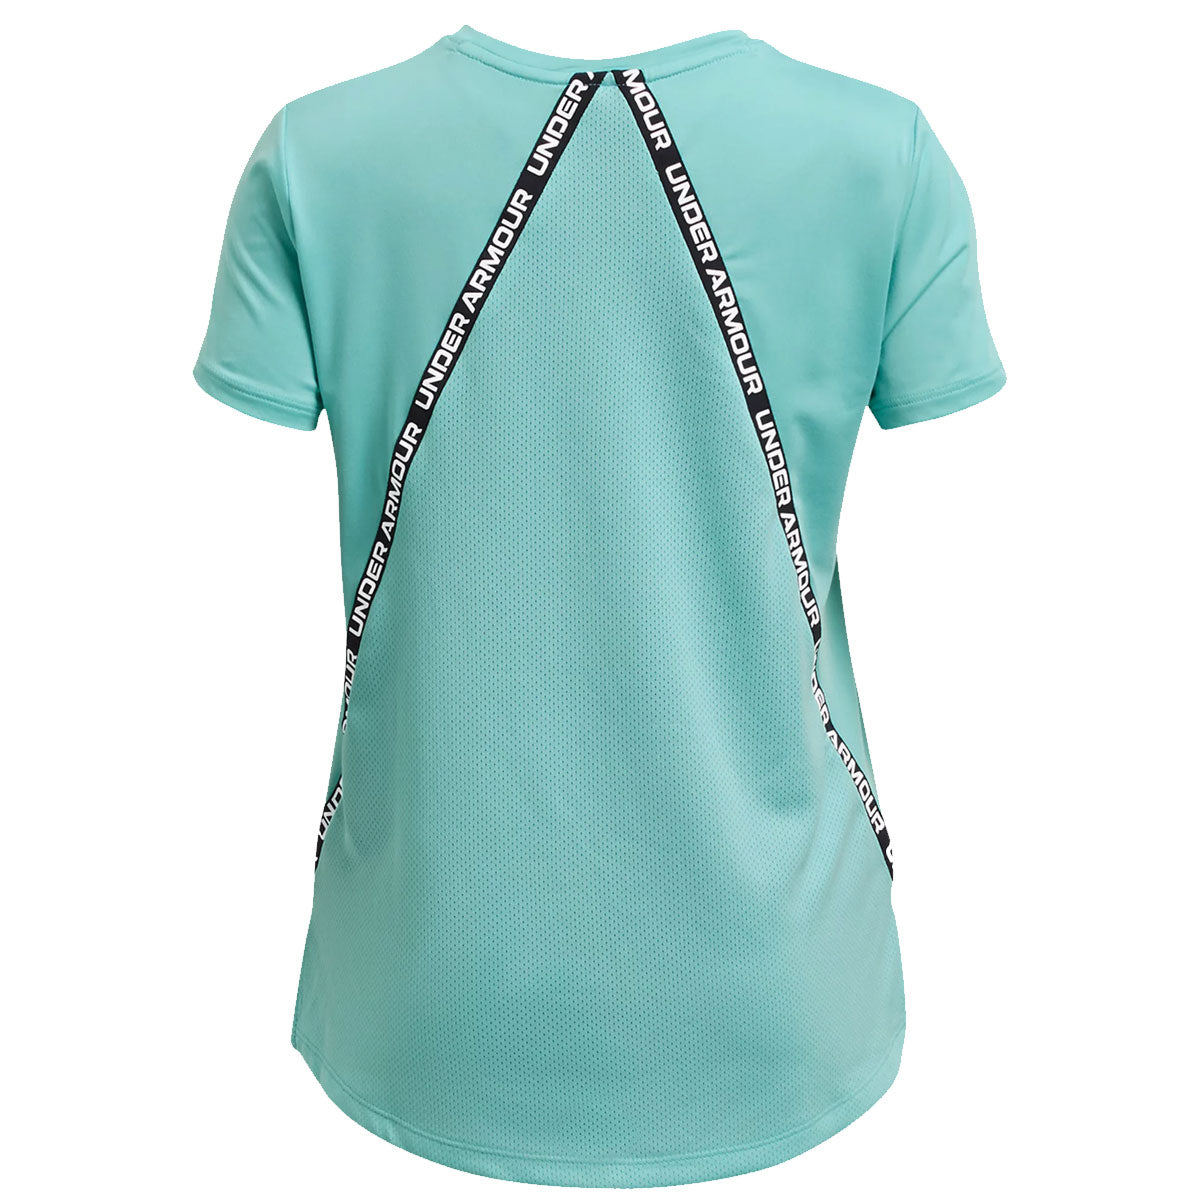 Under Armour Knockout Tee - Girls - Radial Turquoise/White